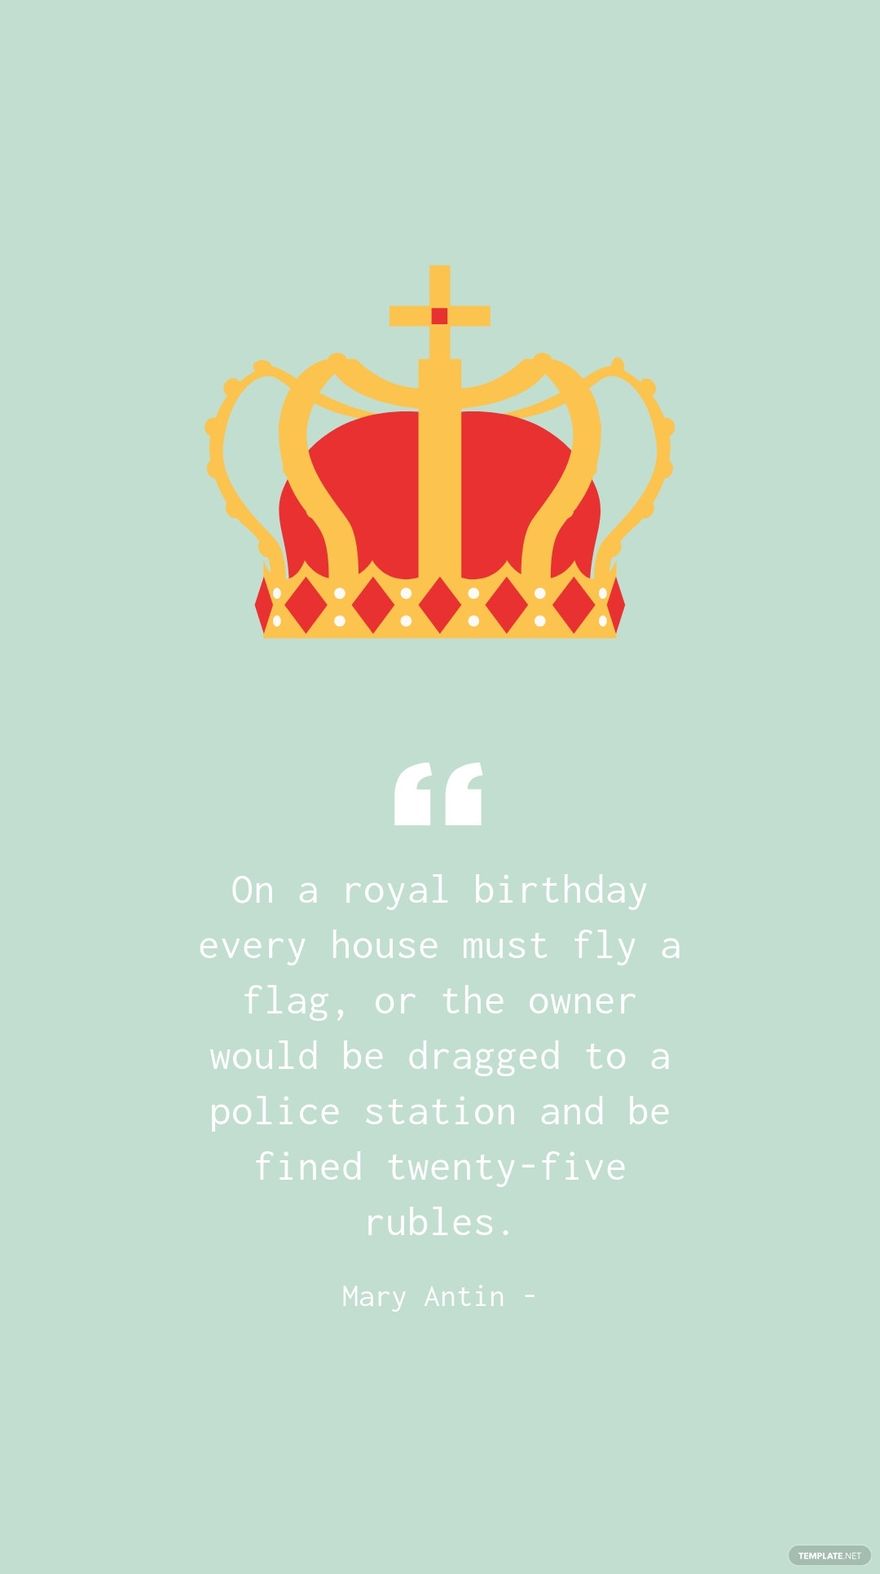 Mary Antin - On a royal birthday every house must fly a flag, or the owner would be dragged to a police station and be fined twenty-five rubles.